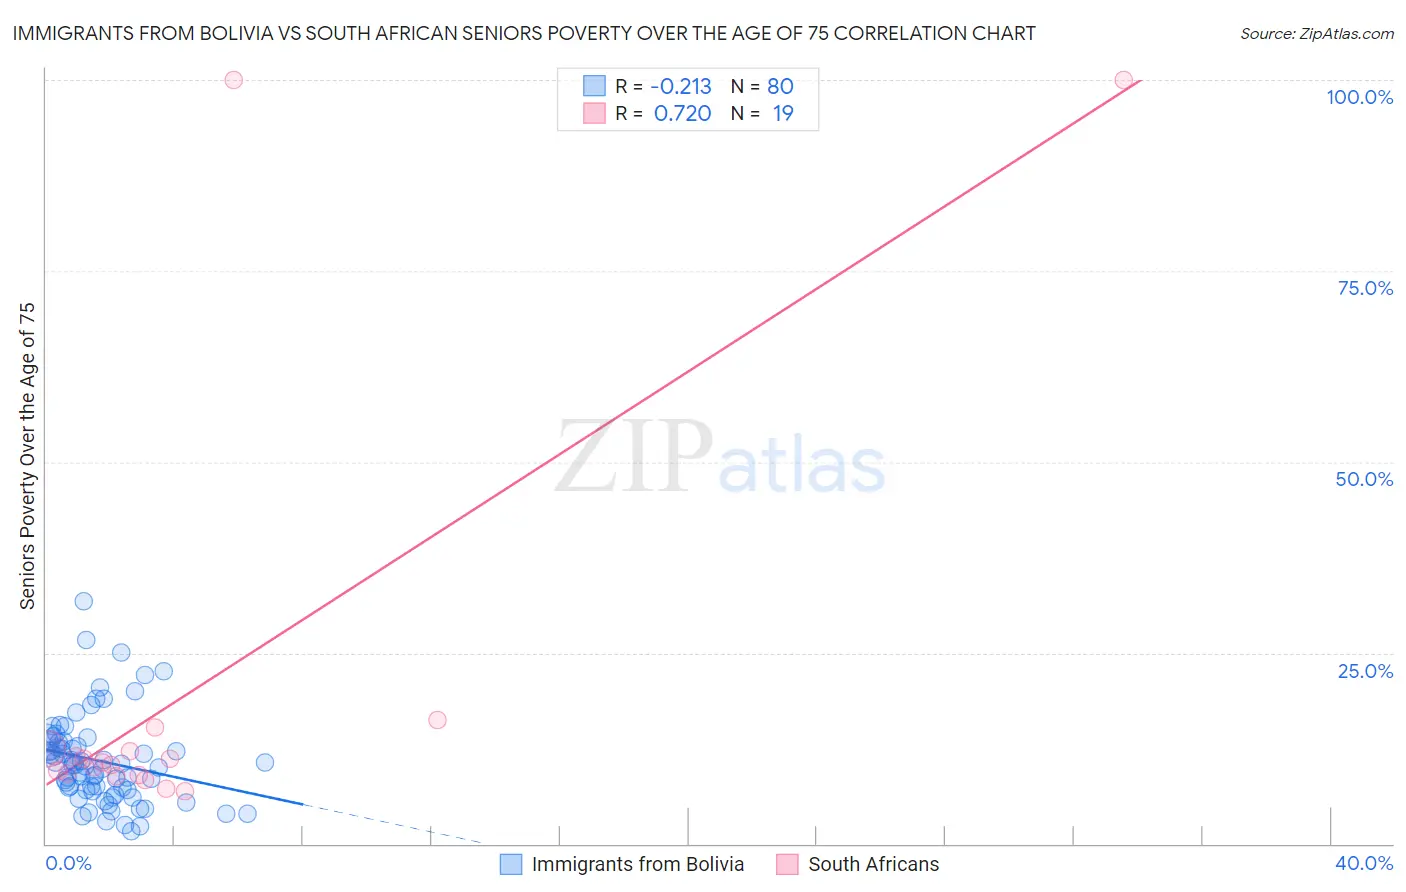 Immigrants from Bolivia vs South African Seniors Poverty Over the Age of 75